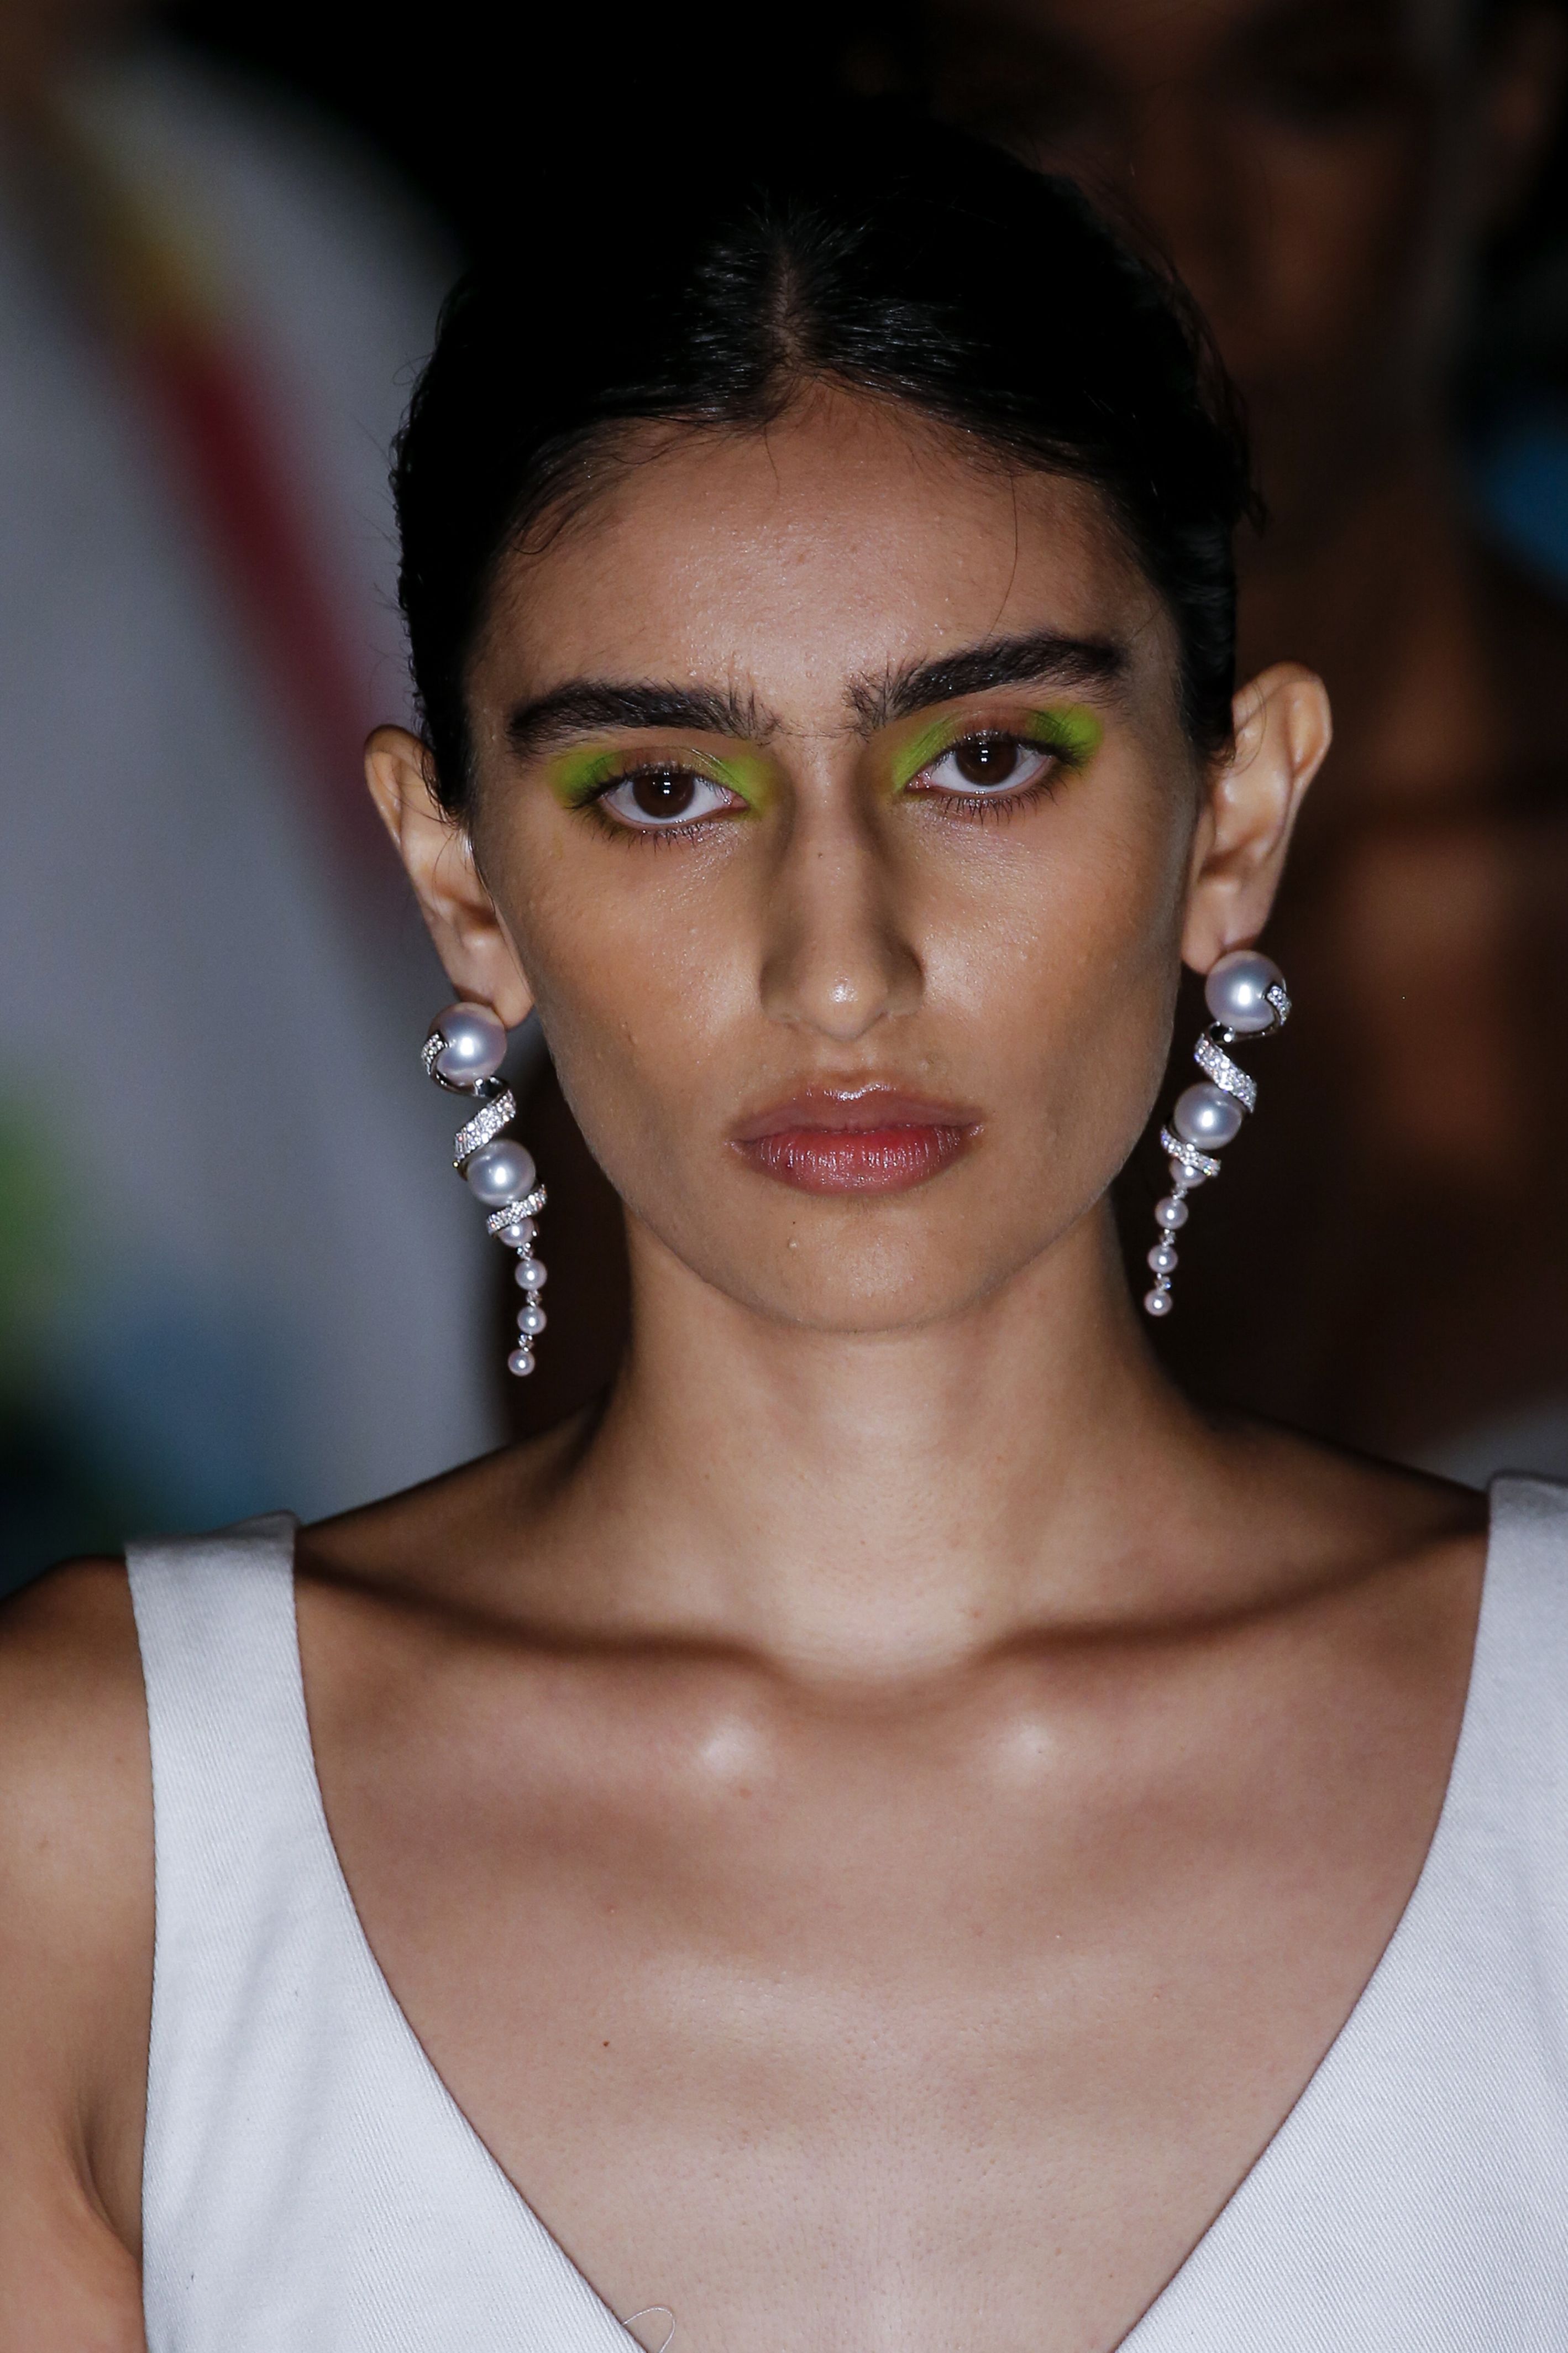 5 Best Fall Jewelry Trends 2022: Top Accessories From the Runways